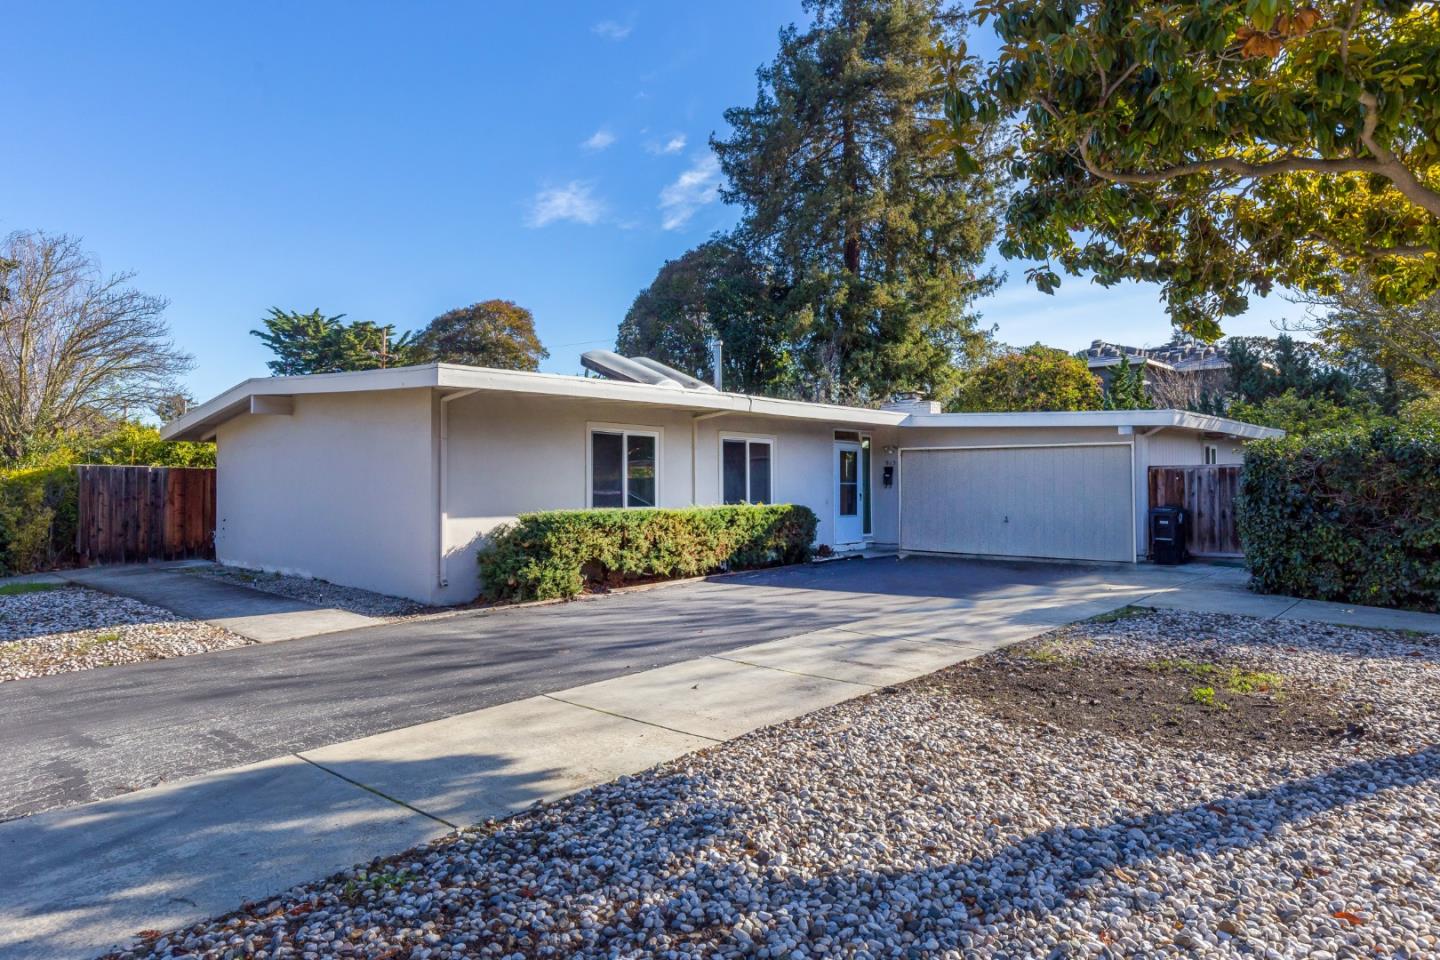 Amazing opportunity to remodel, rebuild or expand in a wonderful South Palo Alto neighborhood. Quiet tree-lined street, convenient location, close to schools, Greer Park, major employers, easy commute. Award-winning Palo Alto schools.